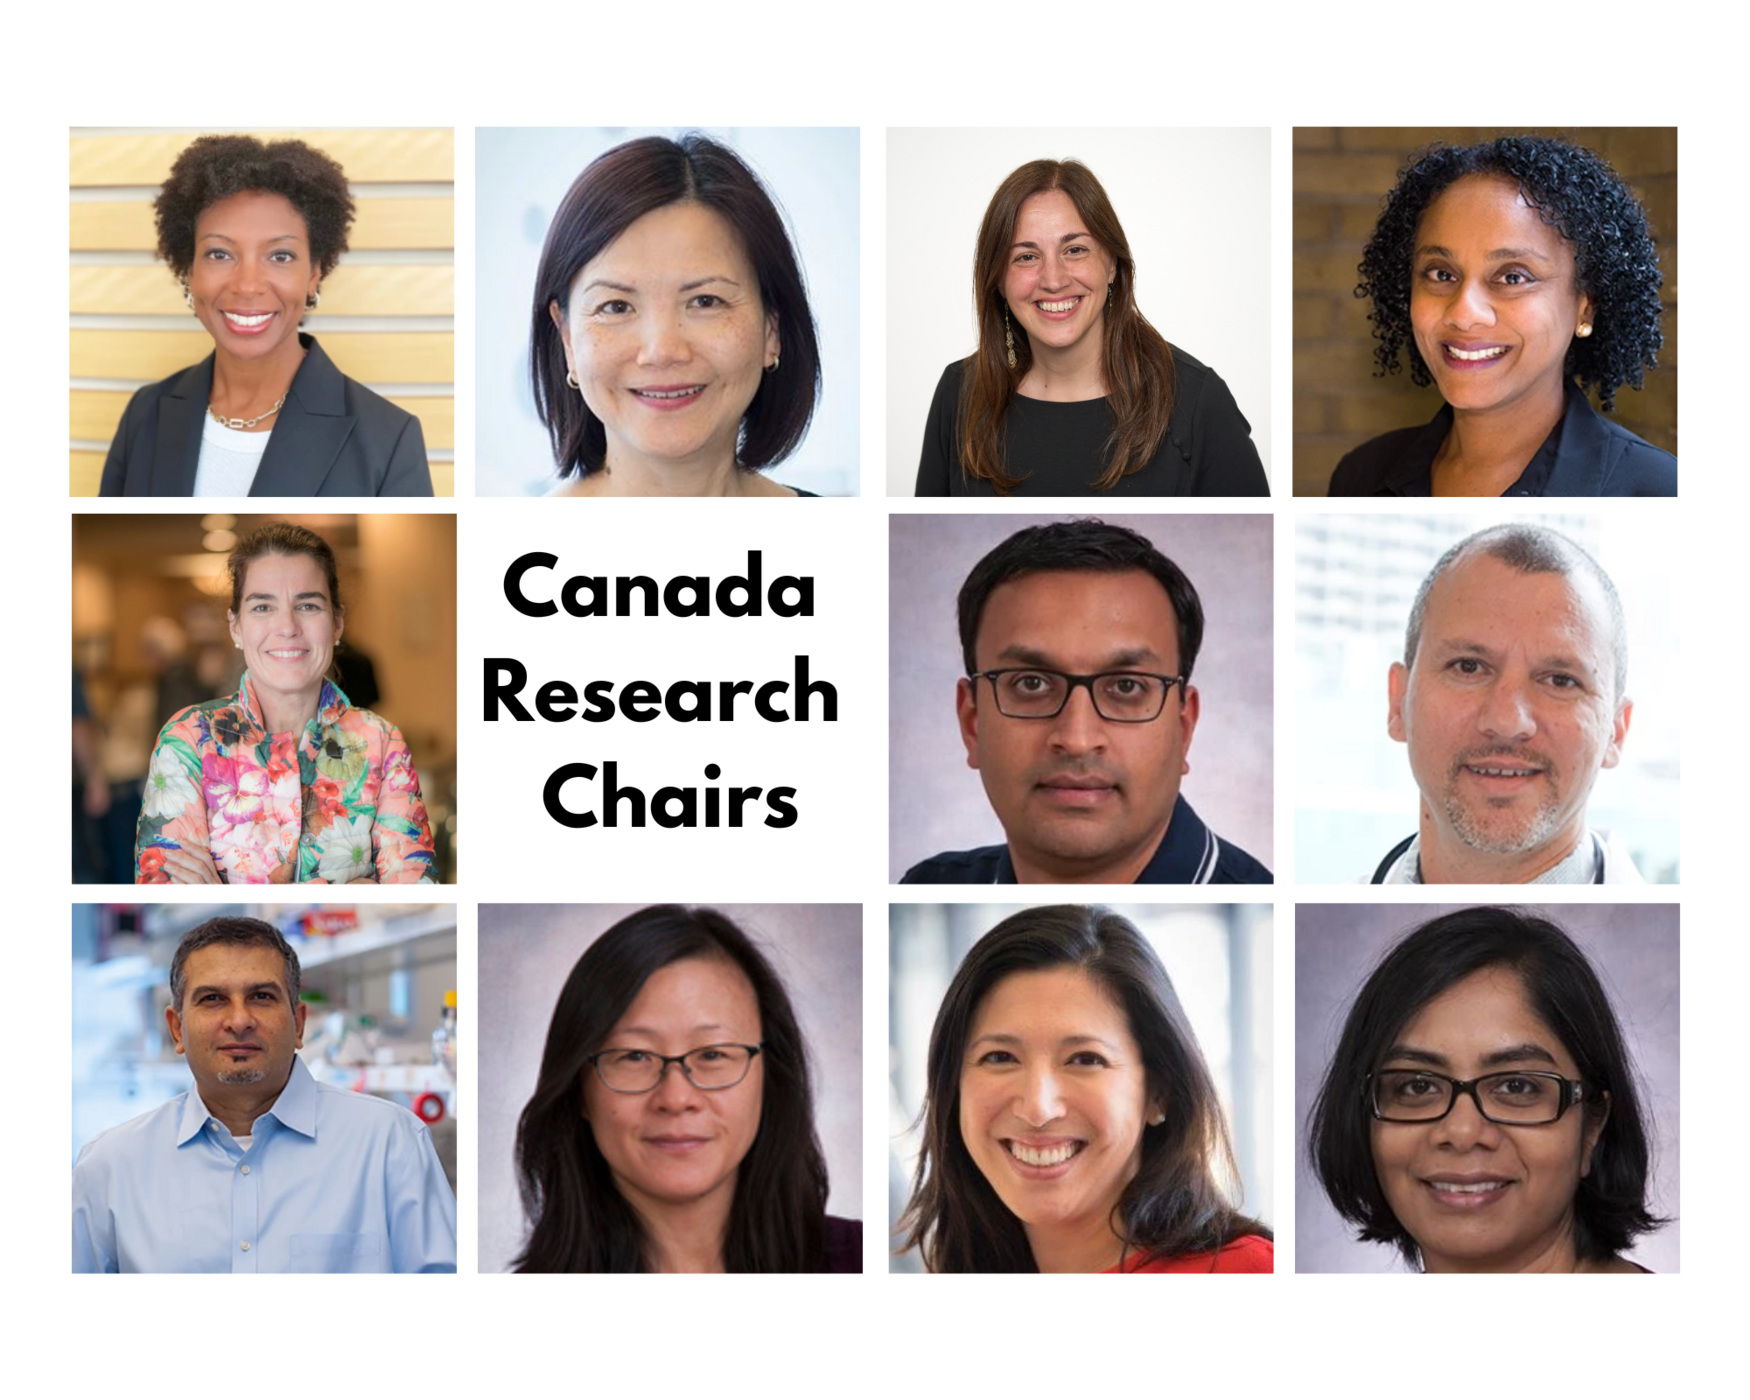 photo collage of Canada Research Chairs group